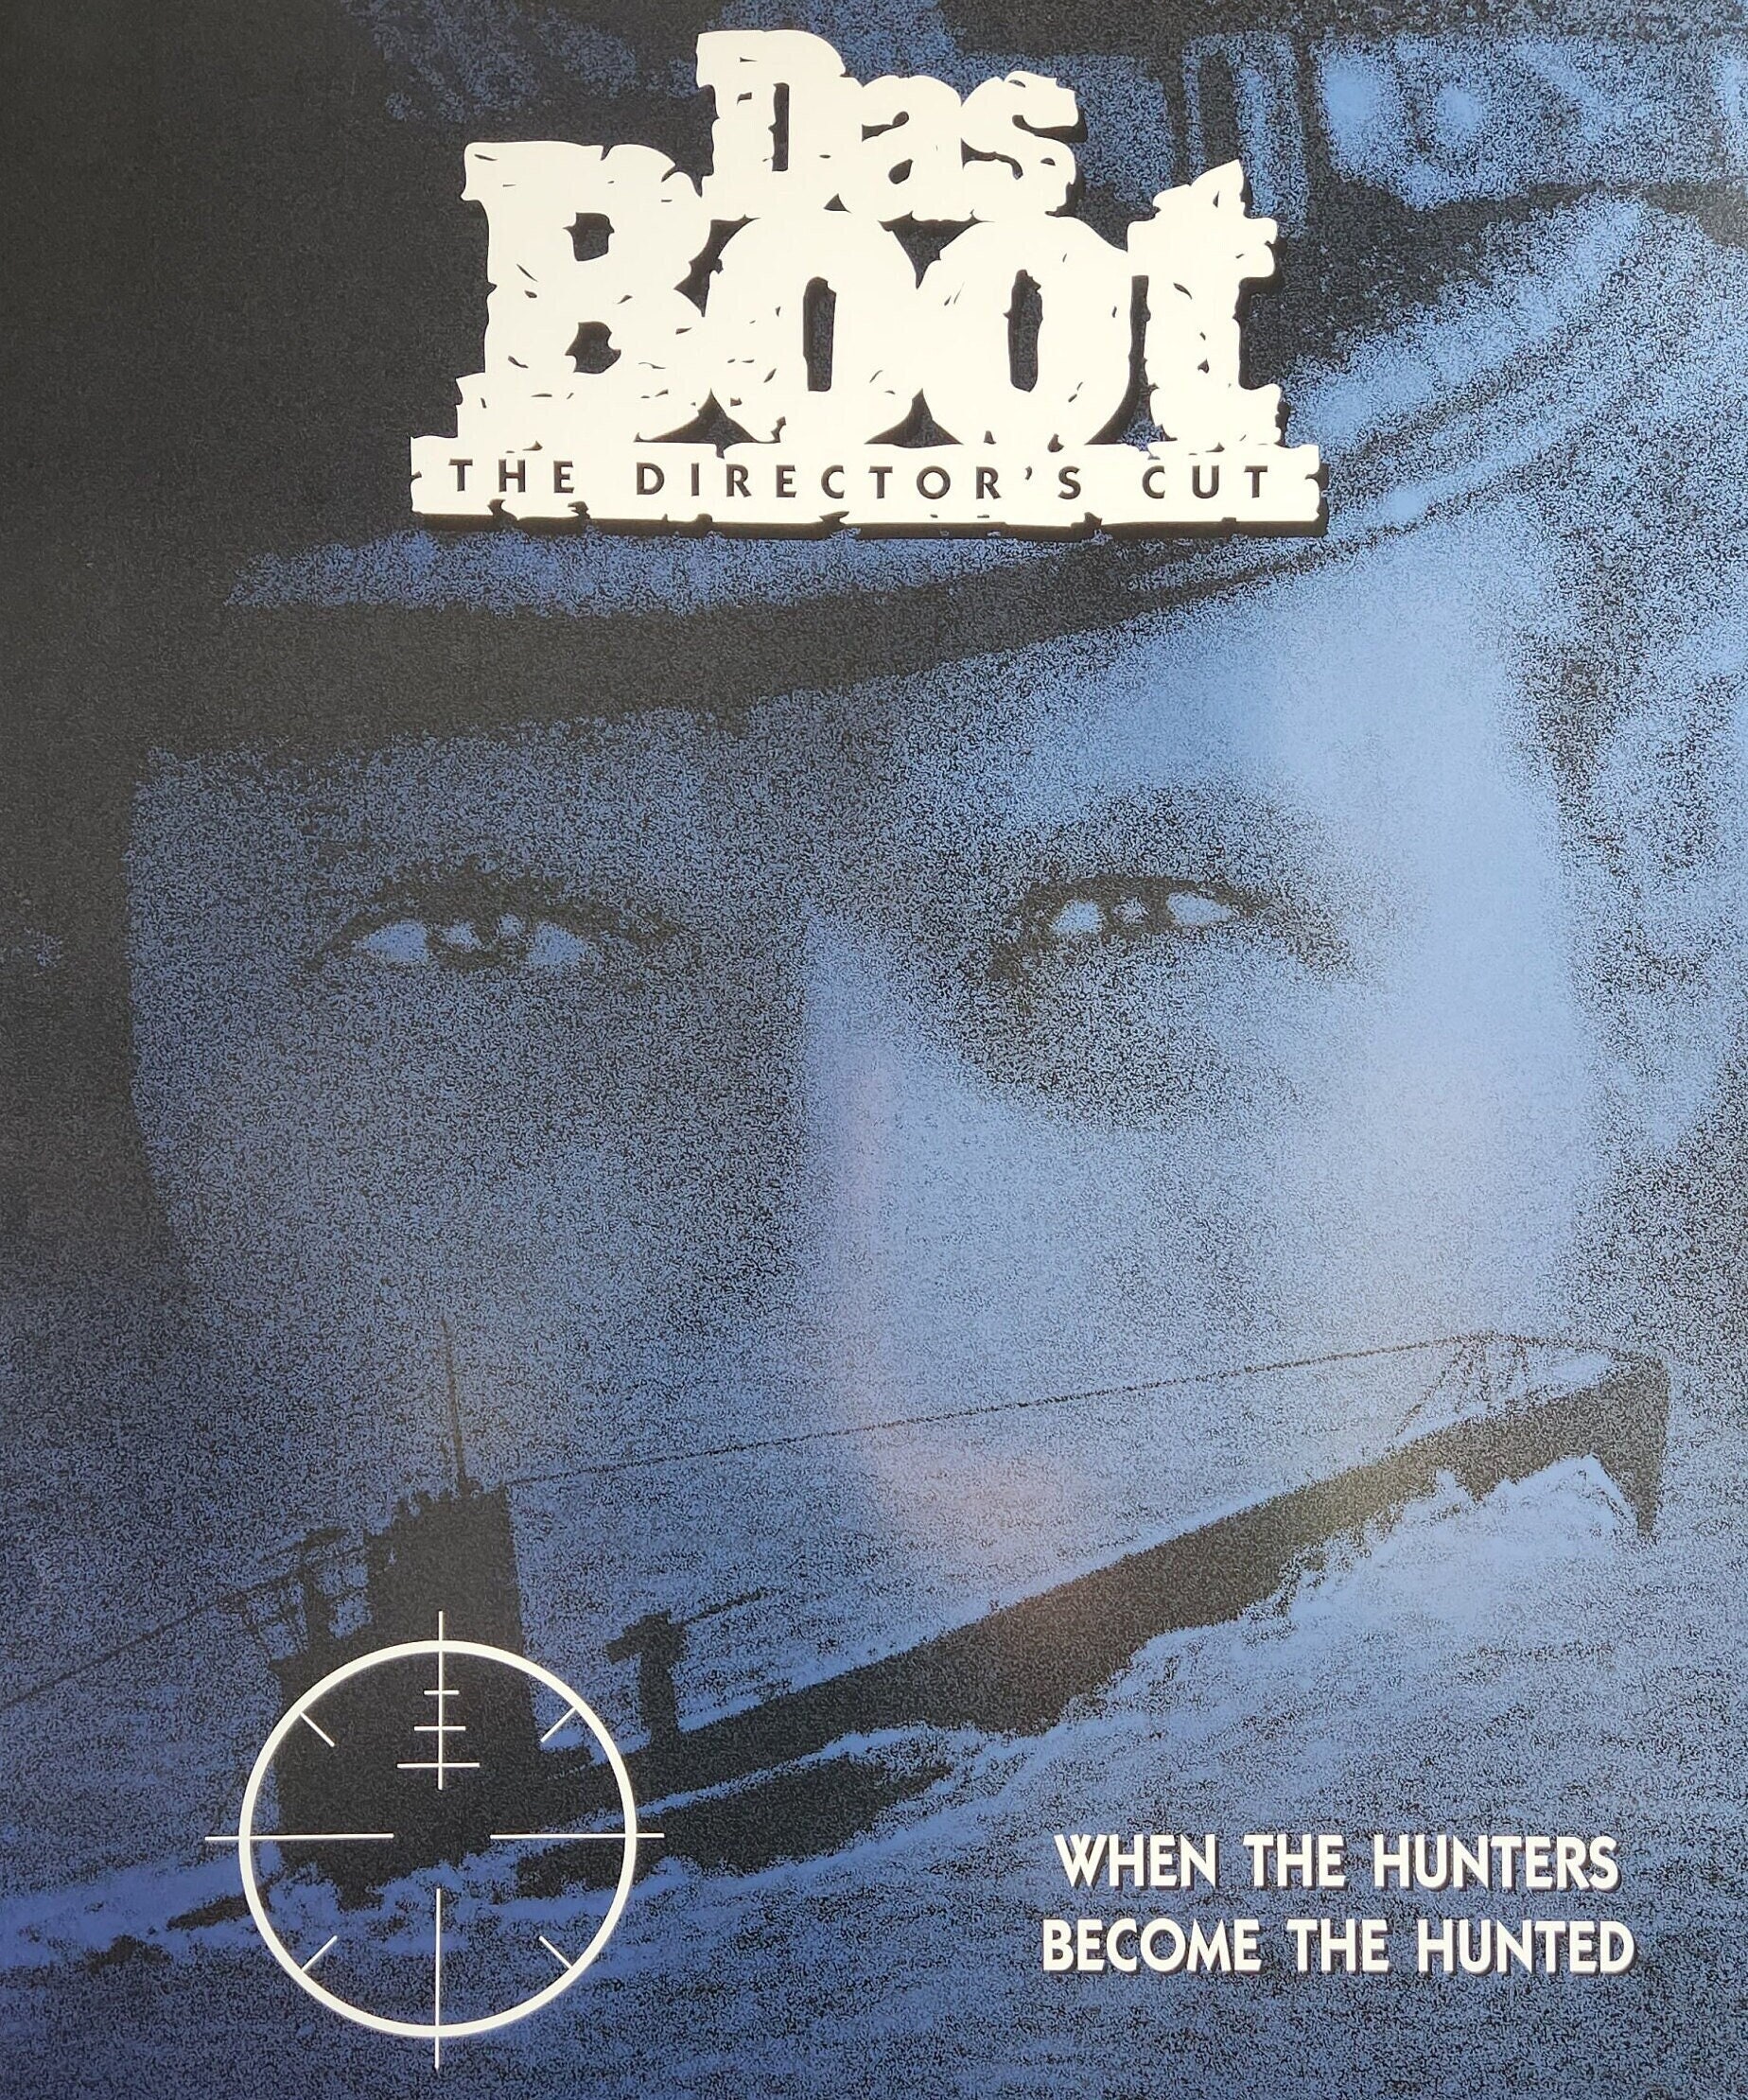 Das Boot-an Vintage Movie Poster for Wolfgang